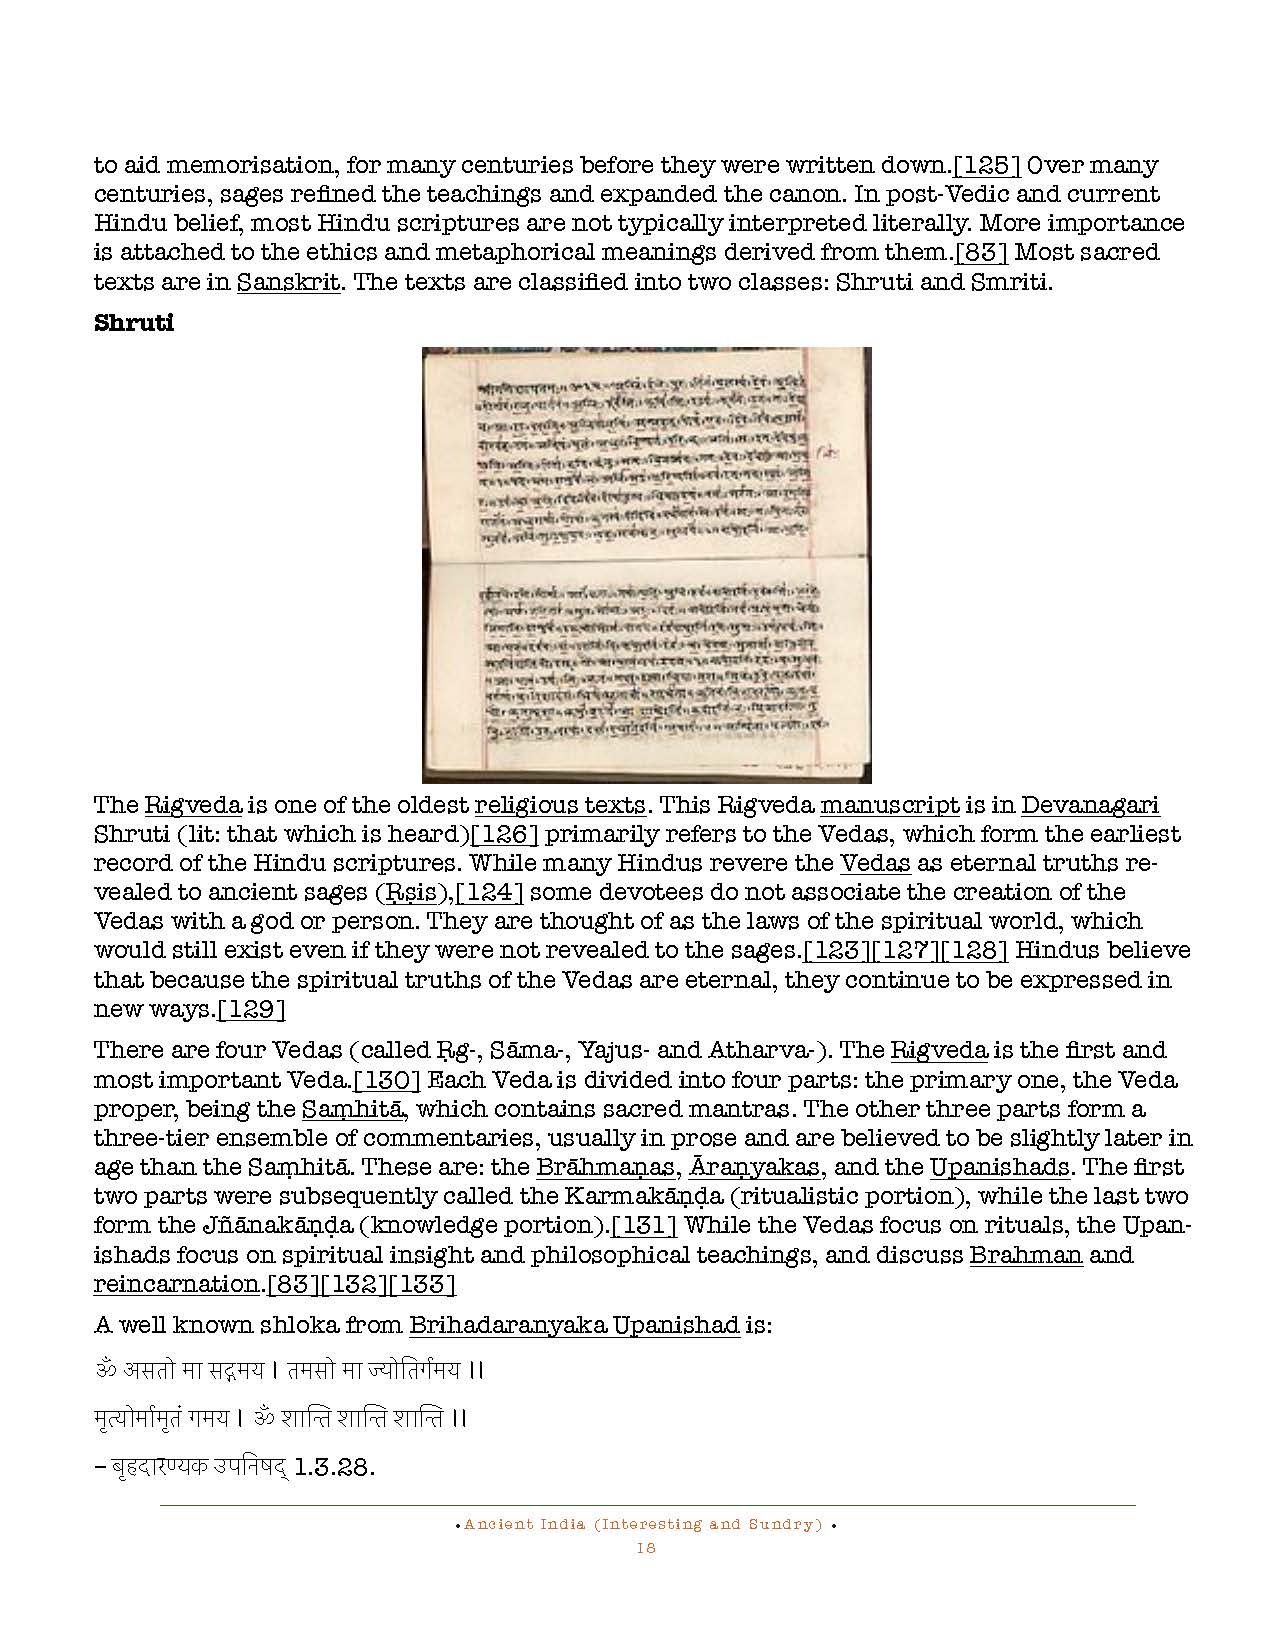 HOCE- Ancient India Notes (Other Interesting and Sundry)_Page_018.jpg